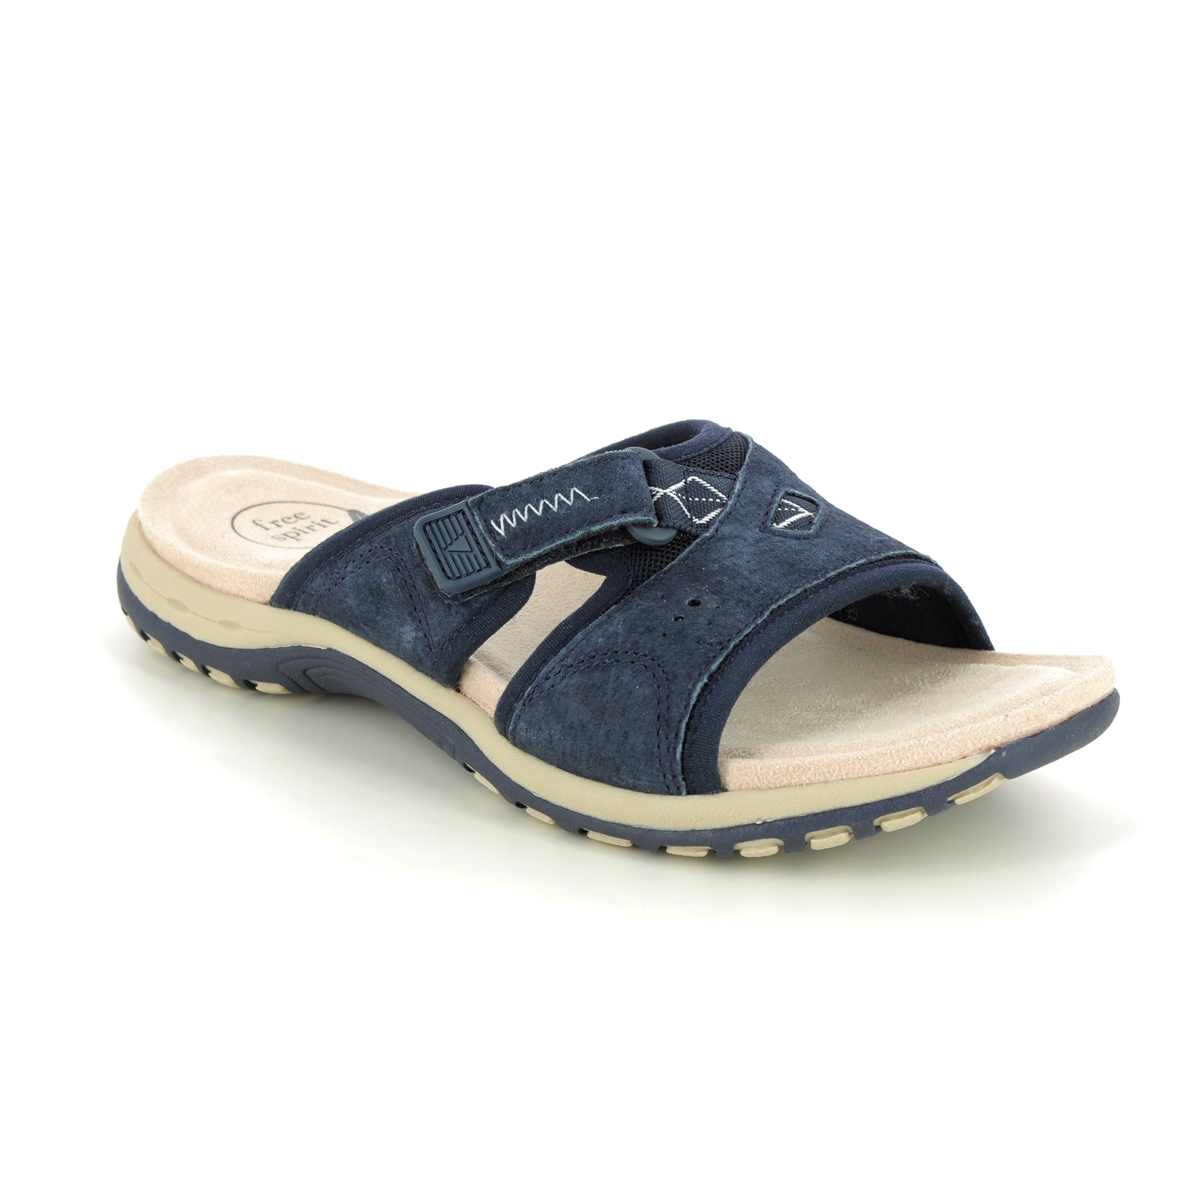 Earth Spirit Wickford Navy Suede Womens Slide Sandals 40517- In Size 4 In Plain Navy Suede